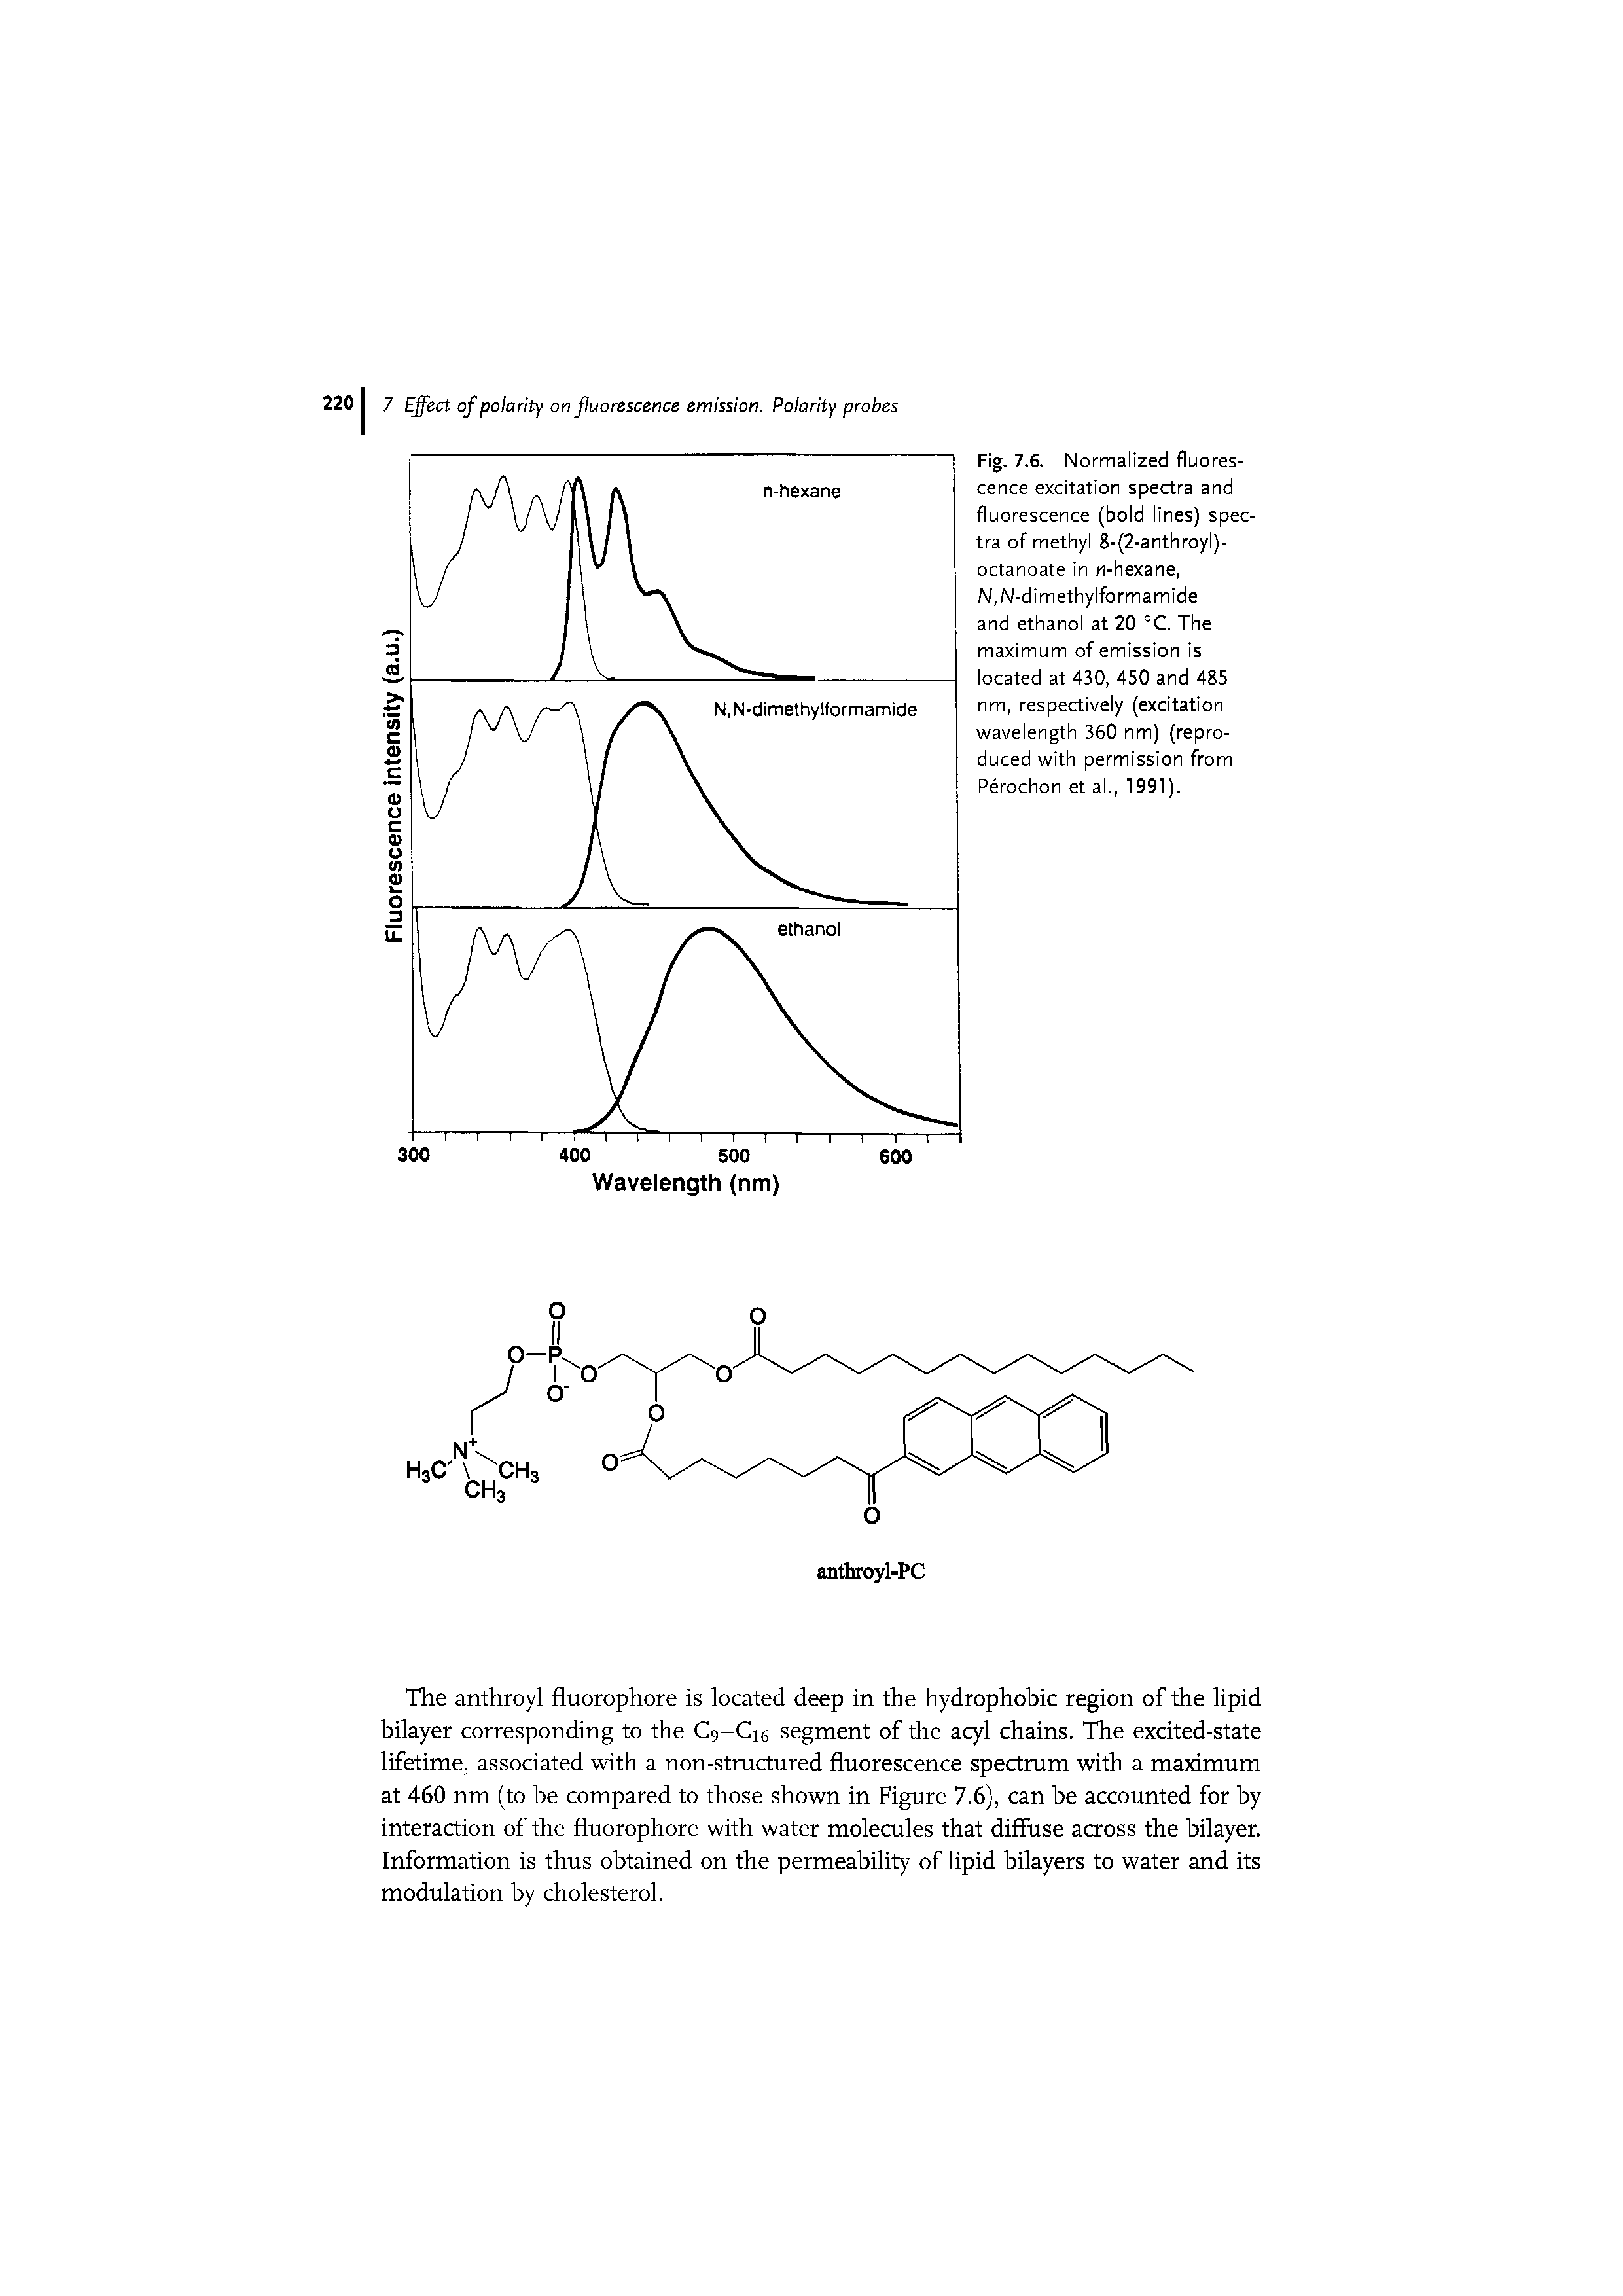 Fig. 7.6. Normalized fluorescence excitation spectra and fluorescence (bold lines) spectra of methyl 8-(2-anthroyl)-octanoate in n-hexane, N,N-dimethylformamide and ethanol at 20 °C. The maximum of emission is located at 430, 450 and 485 nm, respectively (excitation wavelength 360 nm) (reproduced with permission from Perochon et al., 1991).